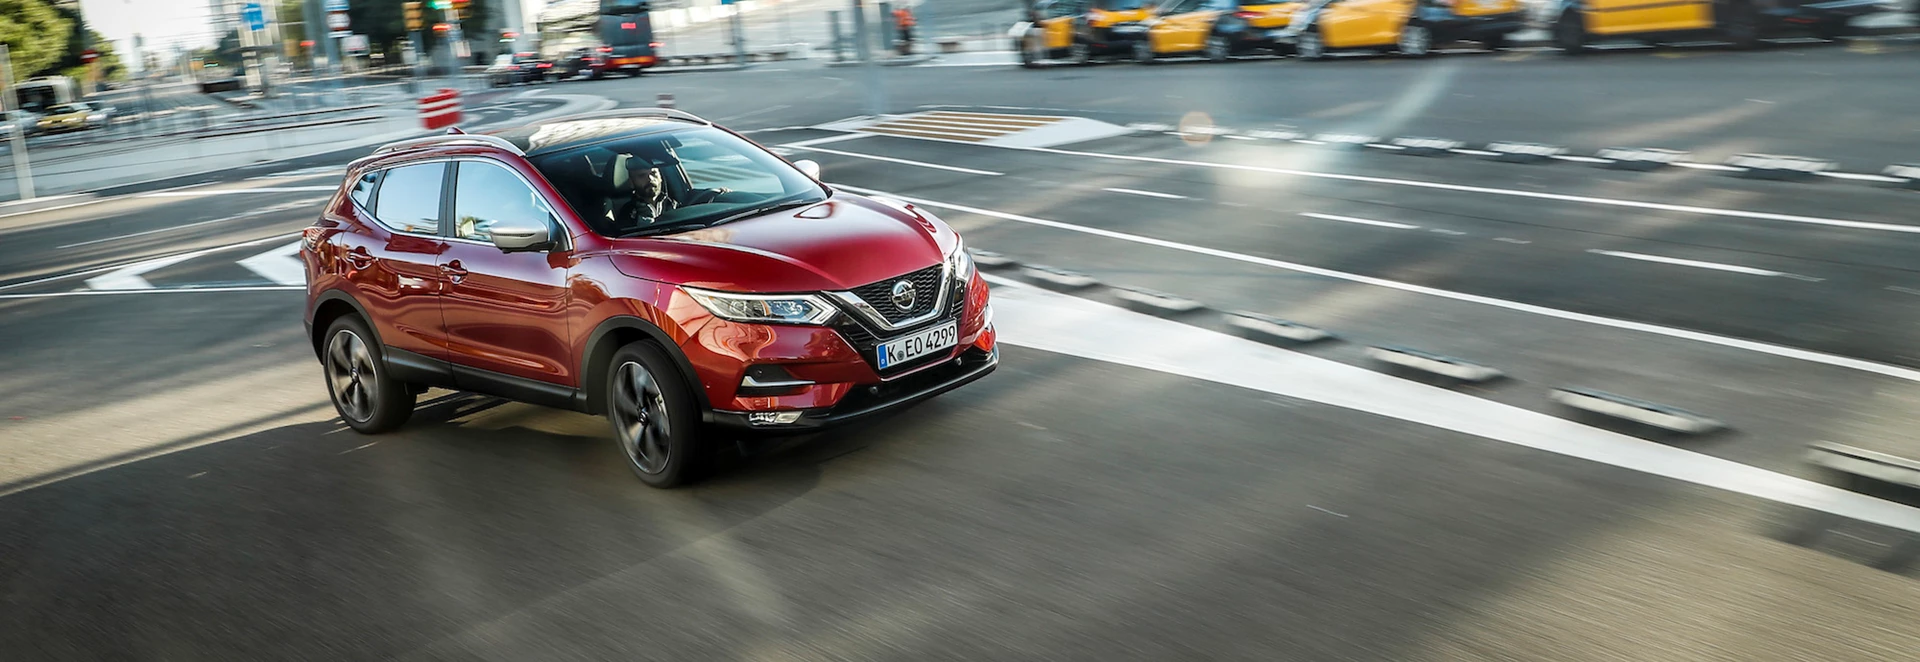 Buyer’s guide to the Nissan Qashqai  